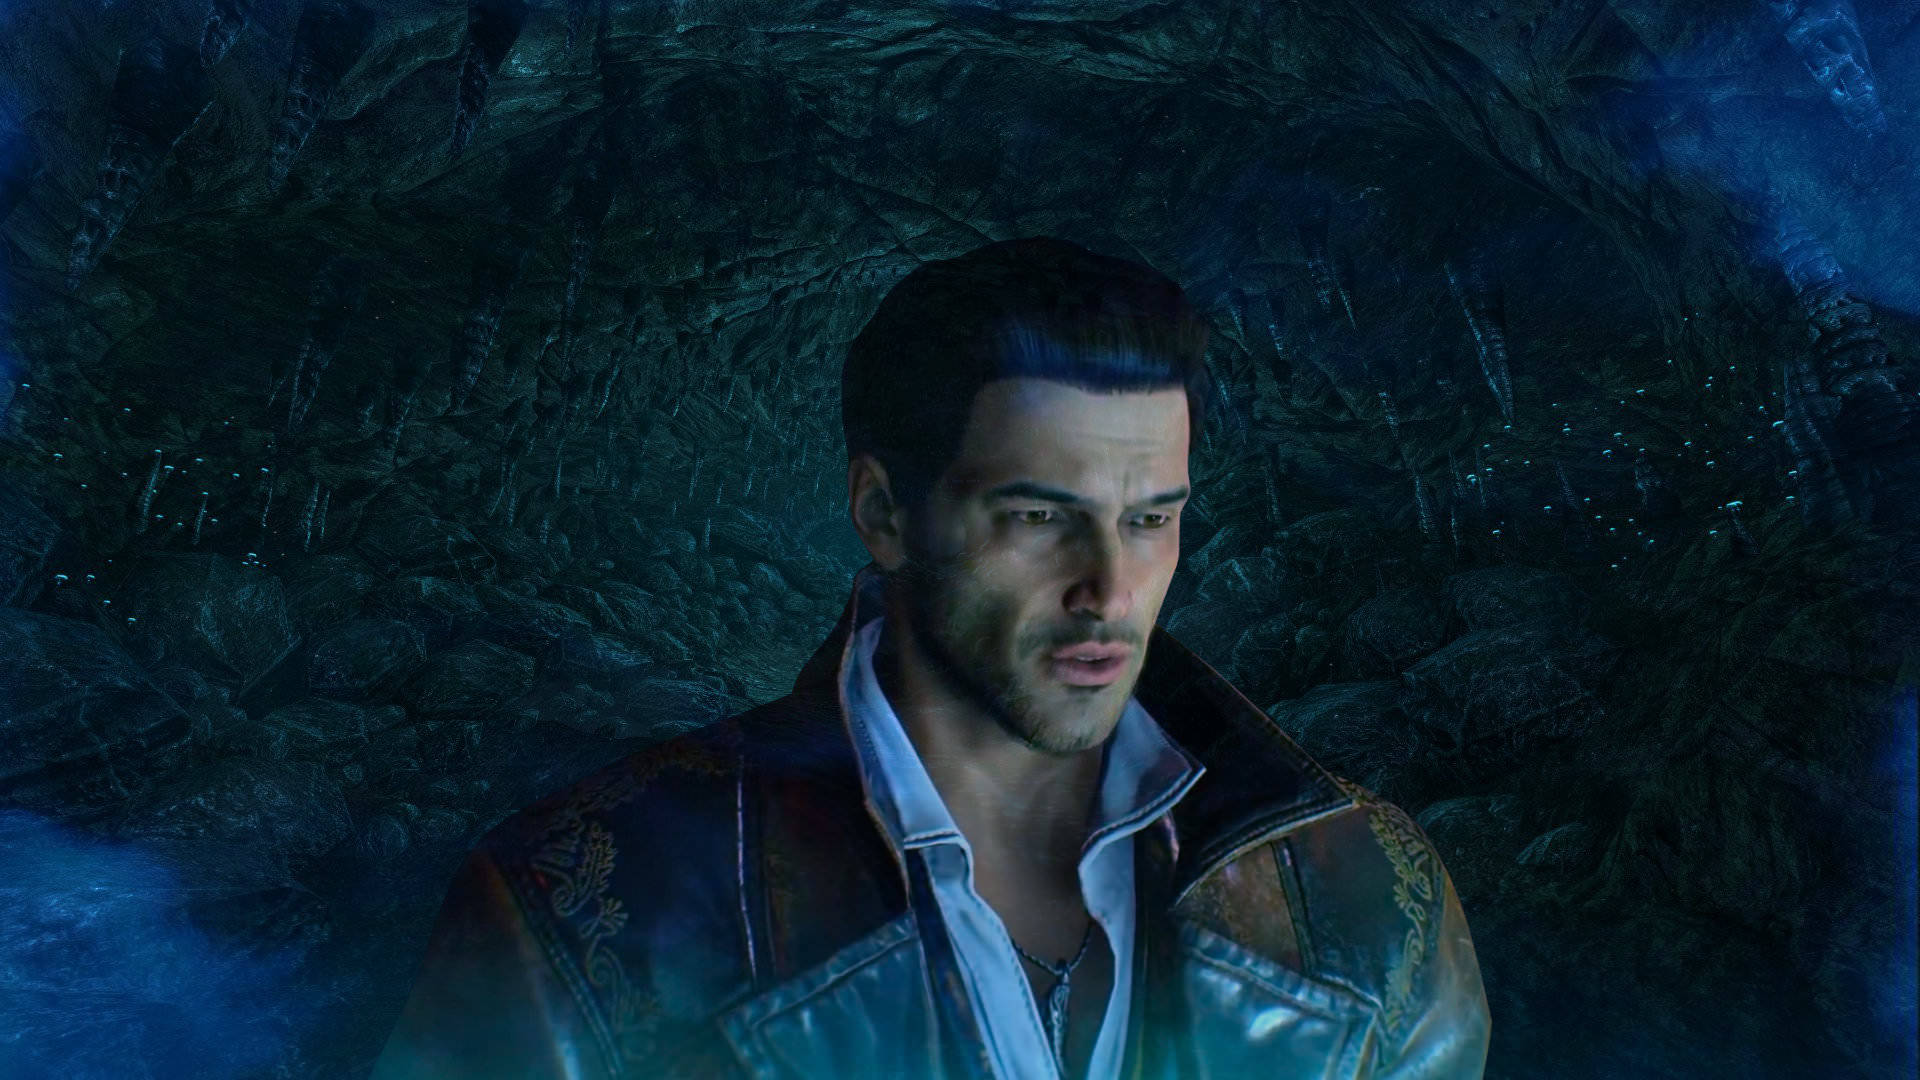 A Man In A Jacket Standing In A Cave Wallpaper